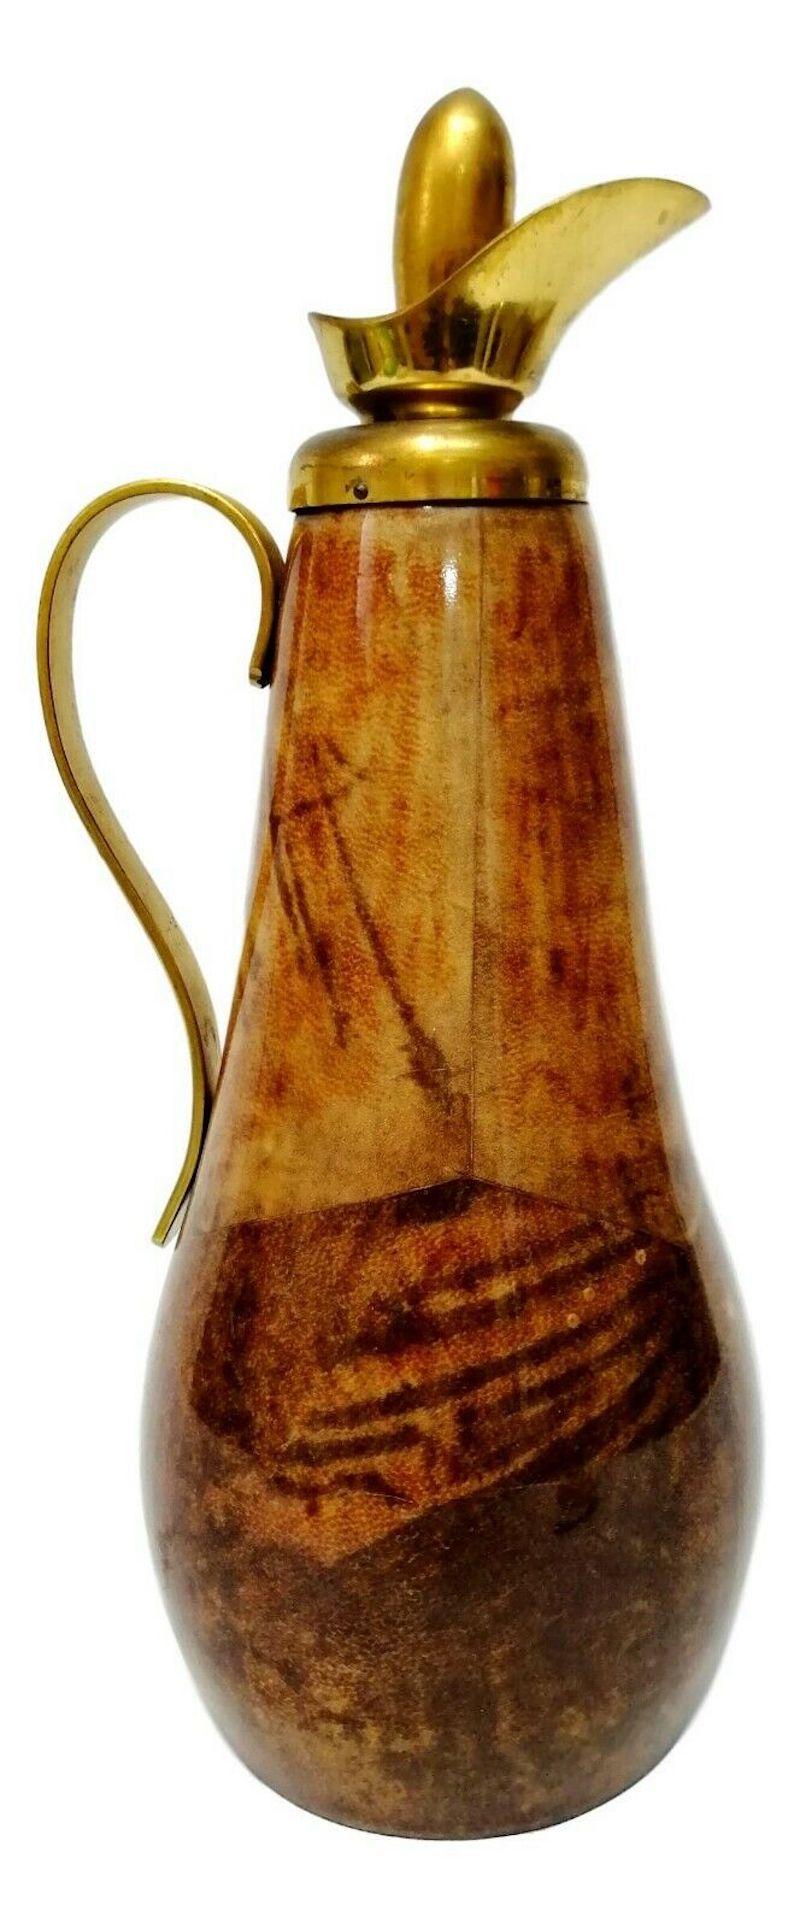 Splendid example of a thermos made by Macabo from Cusano Milanino, high-quality design, 1950s

Made of wood with parchment coating, typical of the production of tura

It measures 32 cm in height in excellent storage conditions, only slight signs